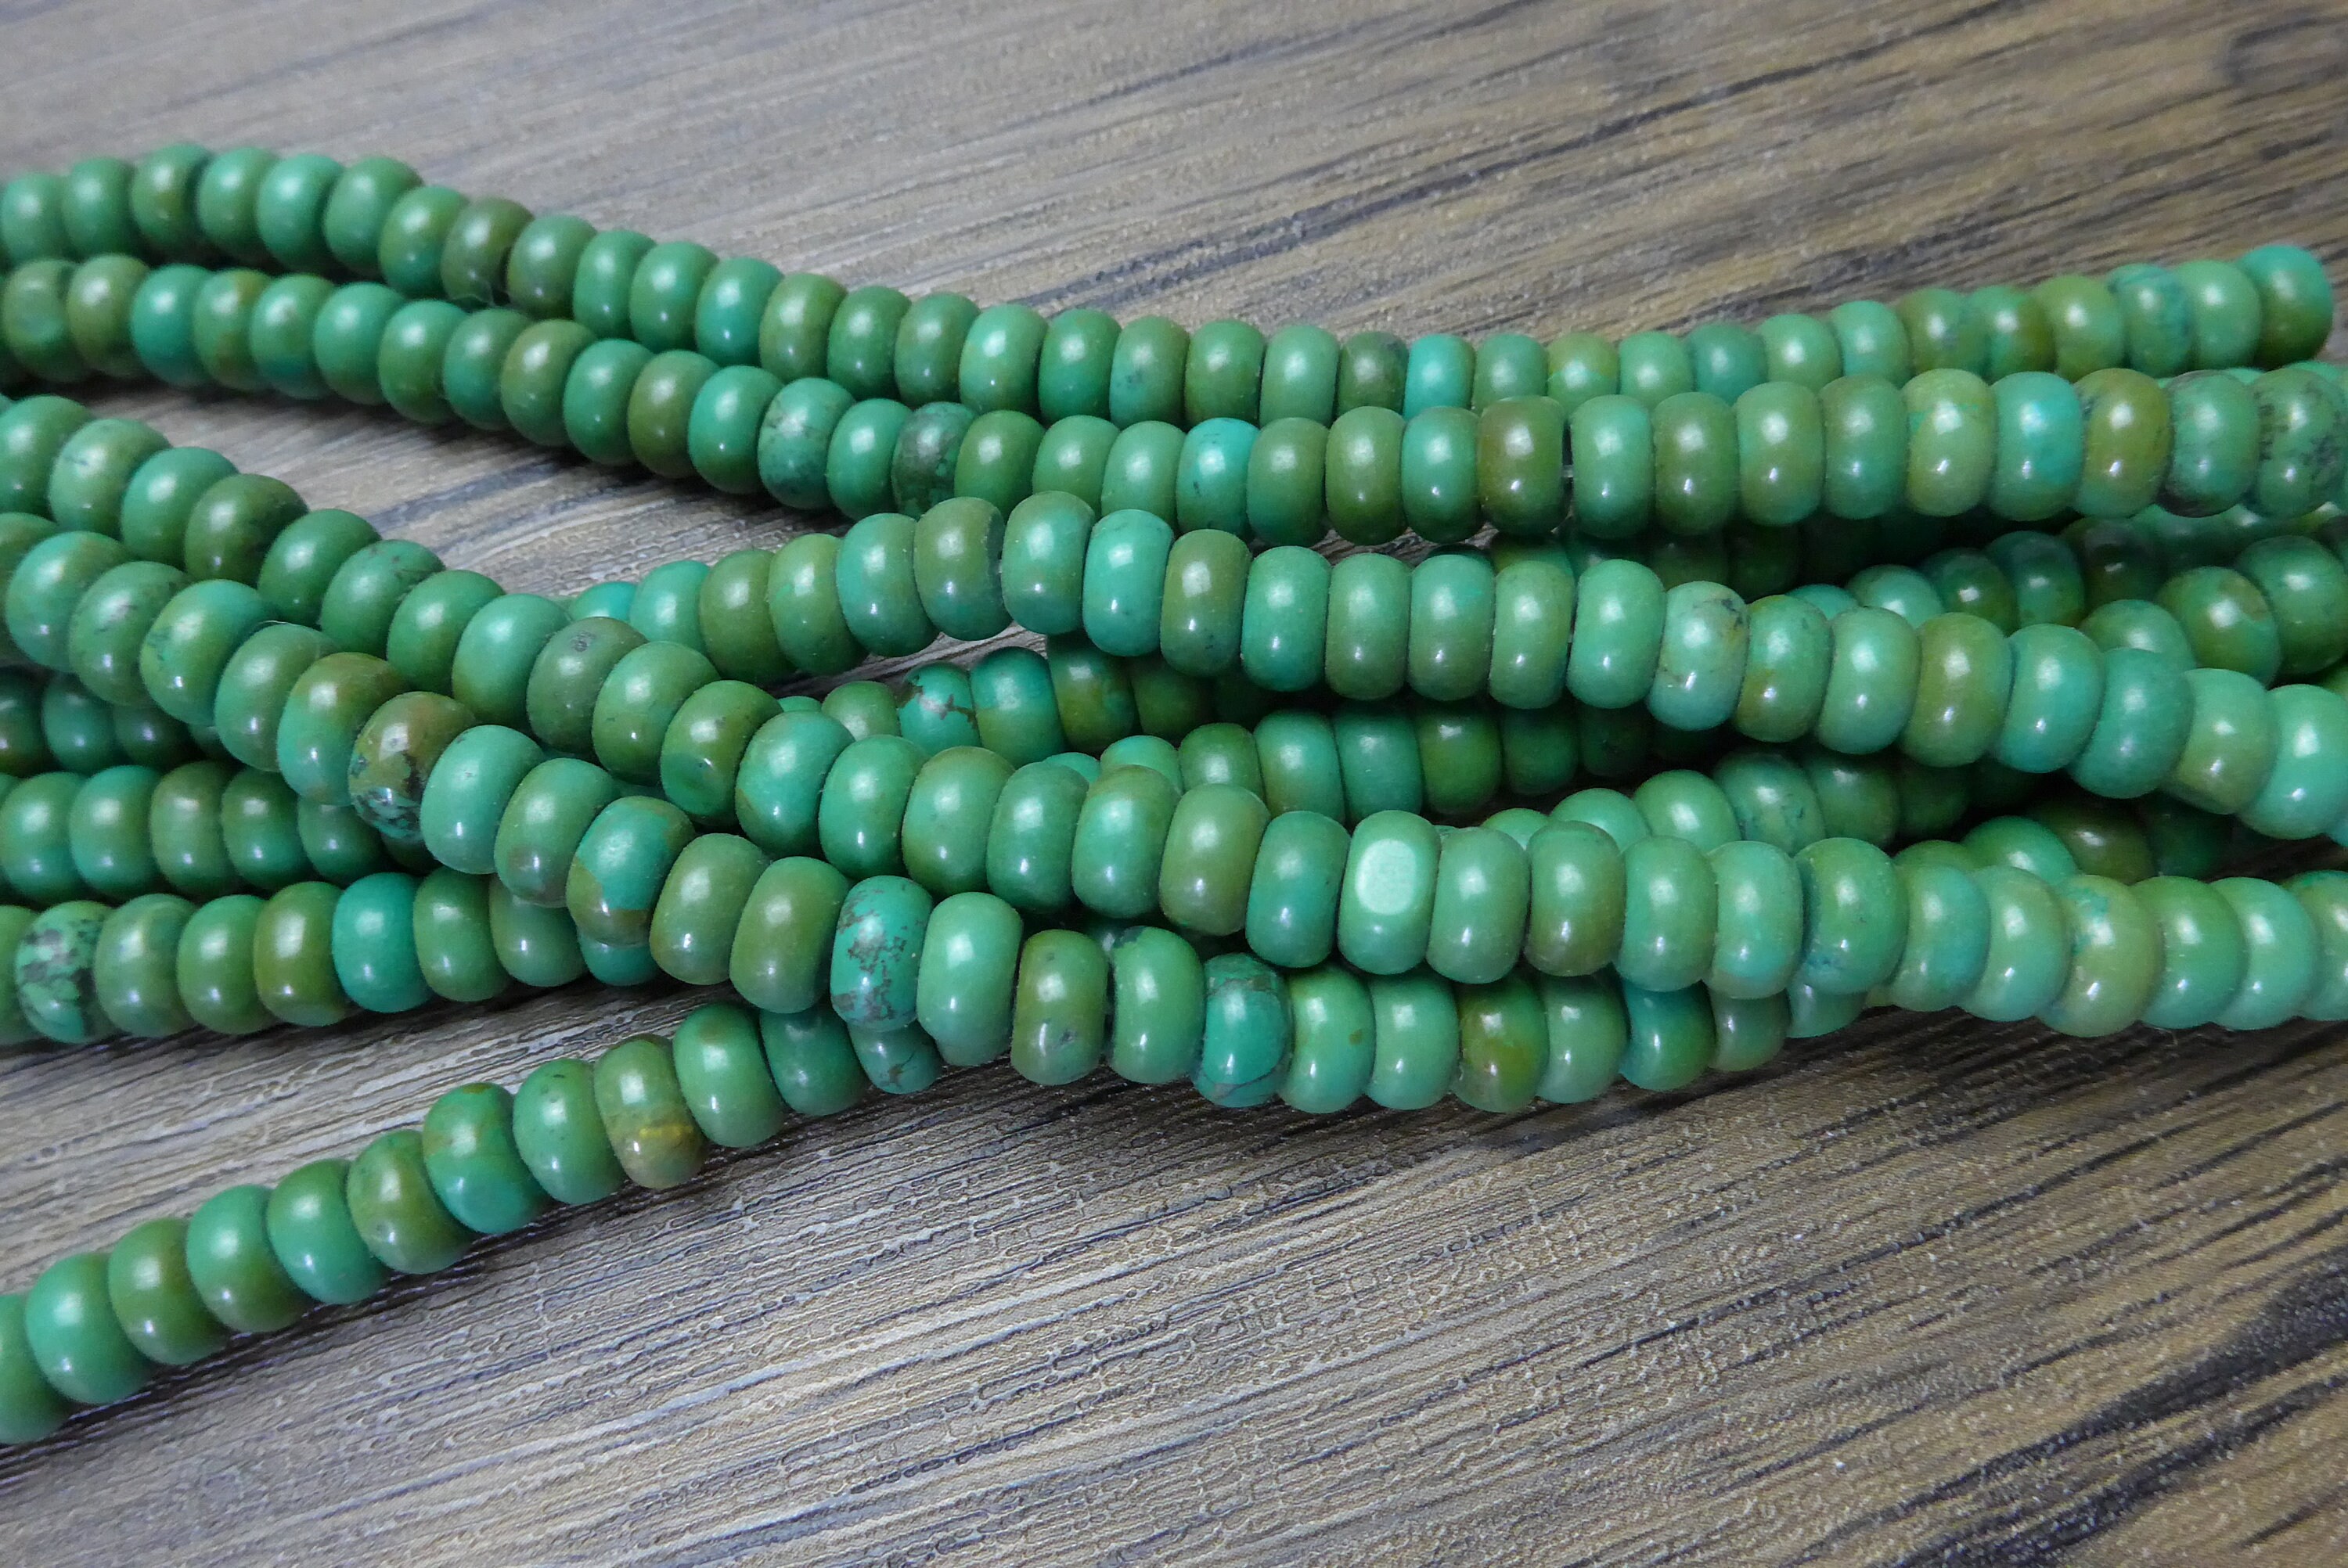 Chinese Turquoise Ab Color Rondelle Beads - Green Yellow Smooth 5x8mm For Jewelry Making